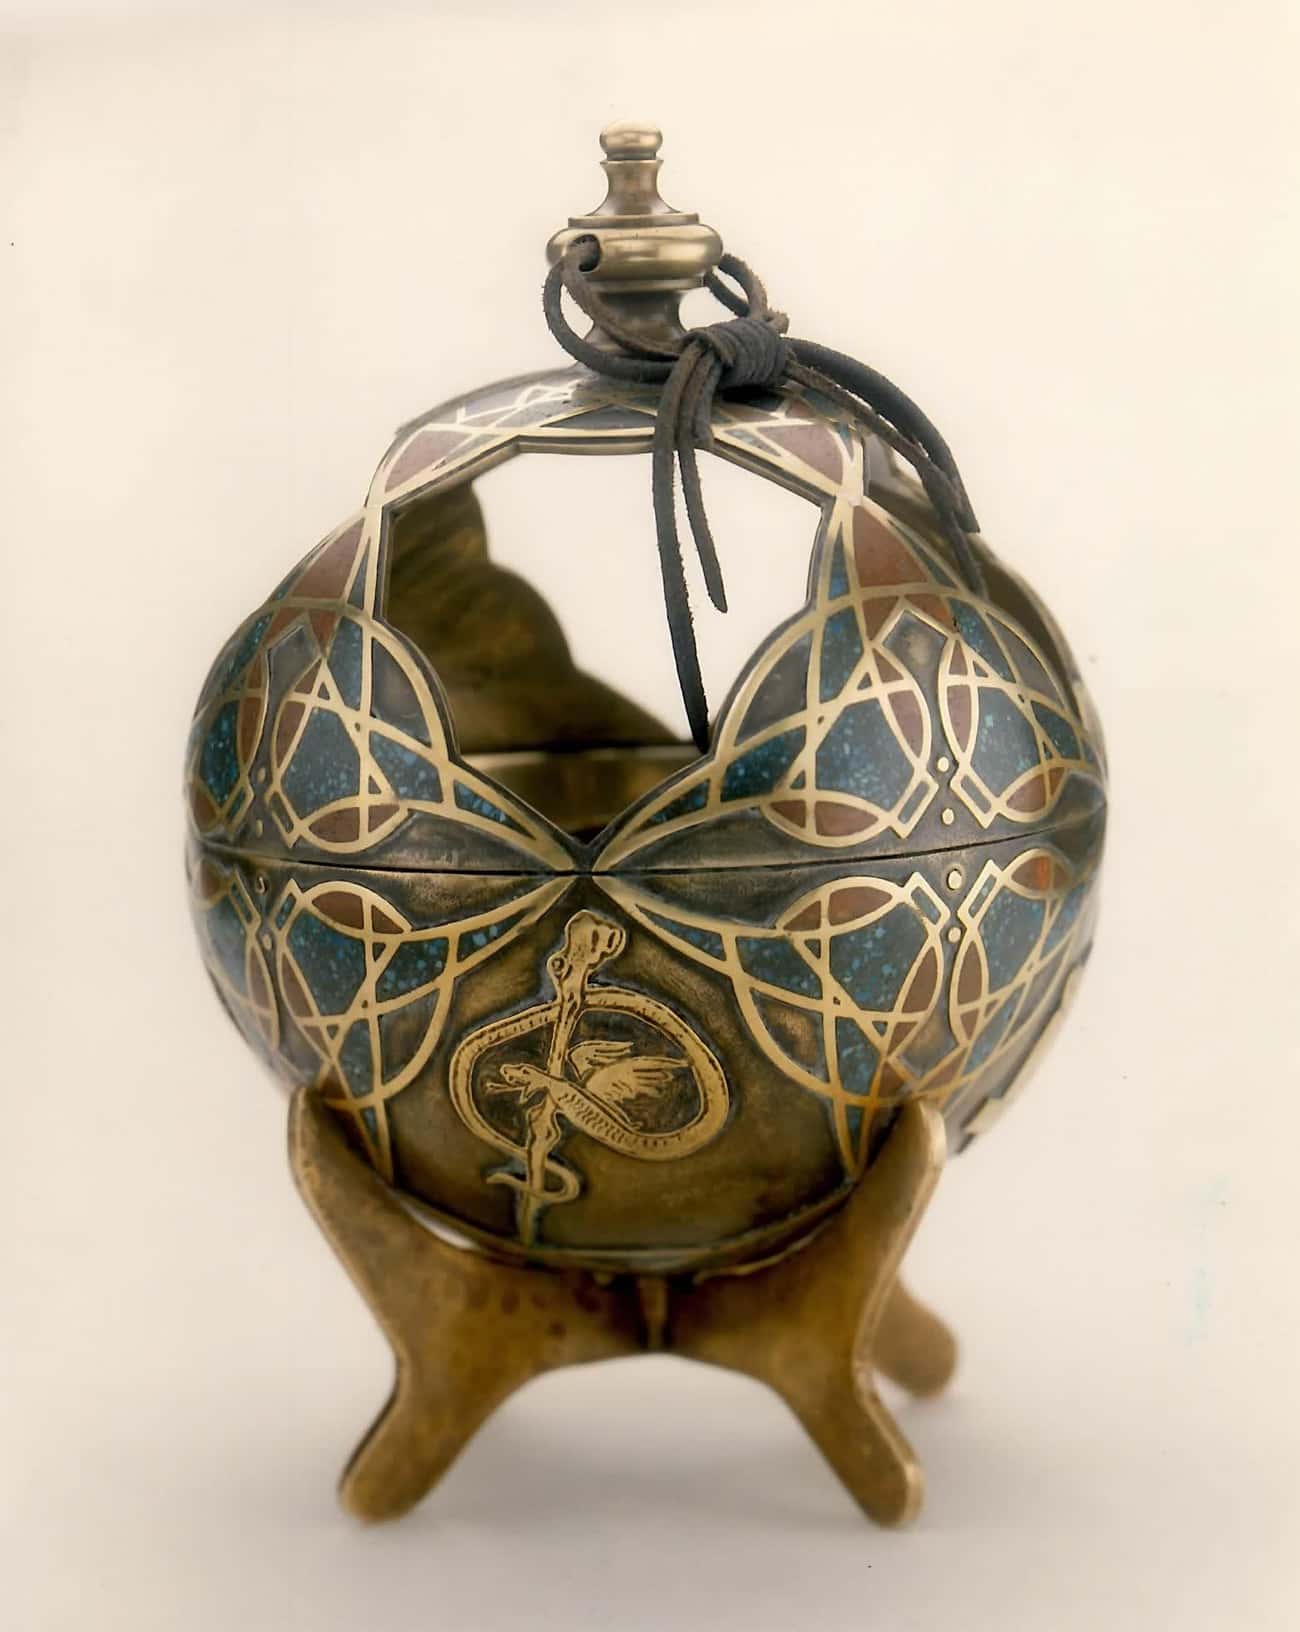 Liahona, a Compass Made by God to Guide the Prophet Lehi to Safety